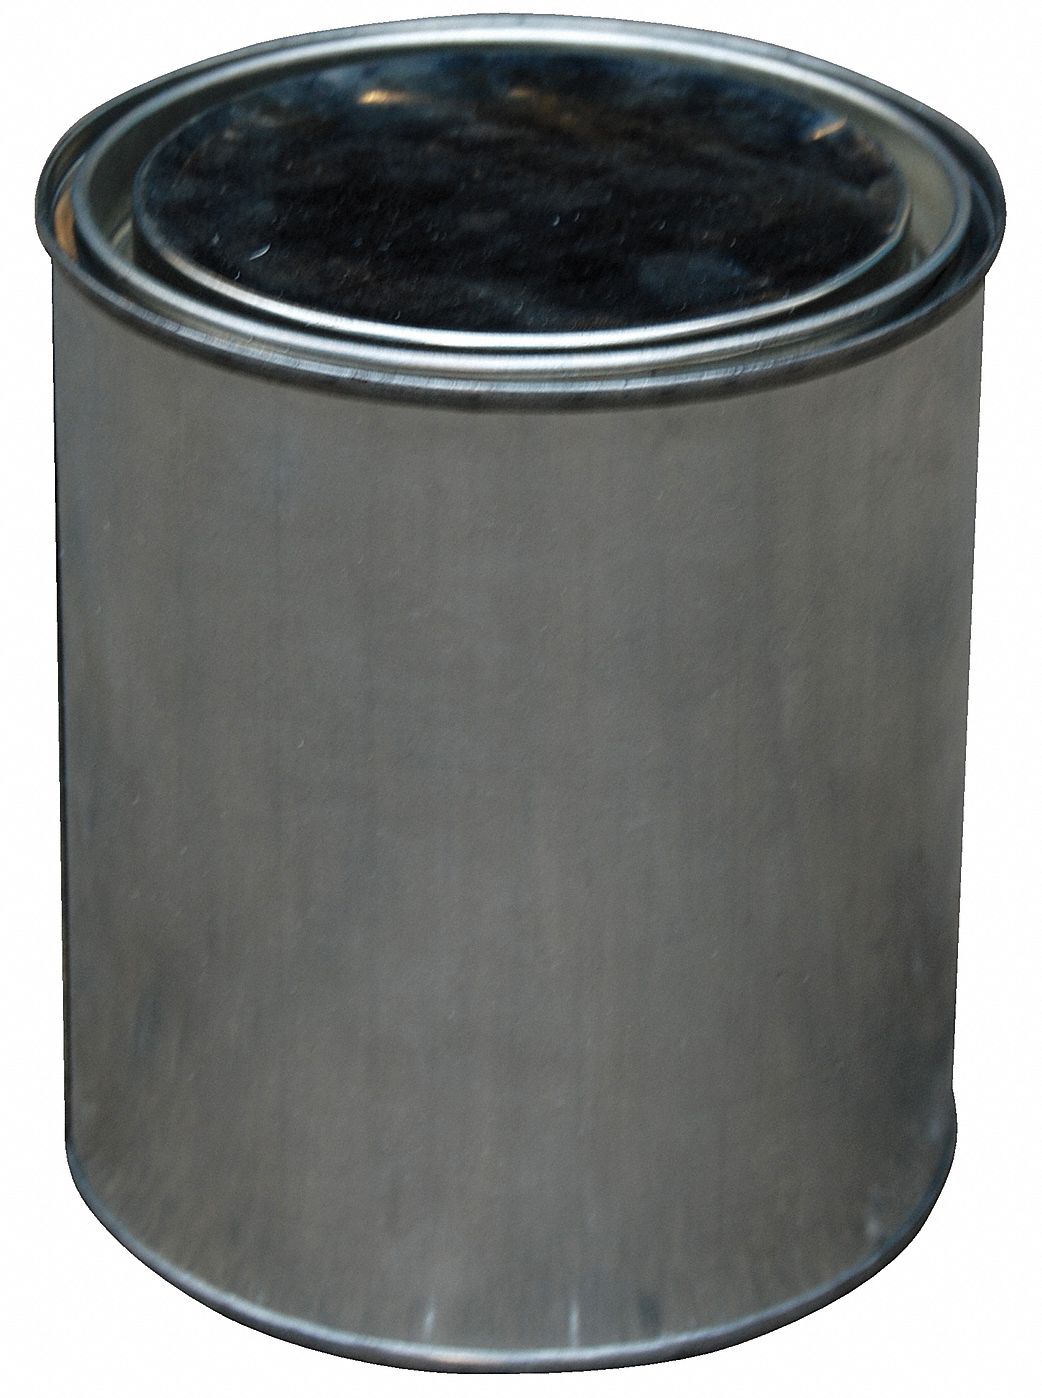 6CTF0 - Round Metal Can 32 oz With Lid